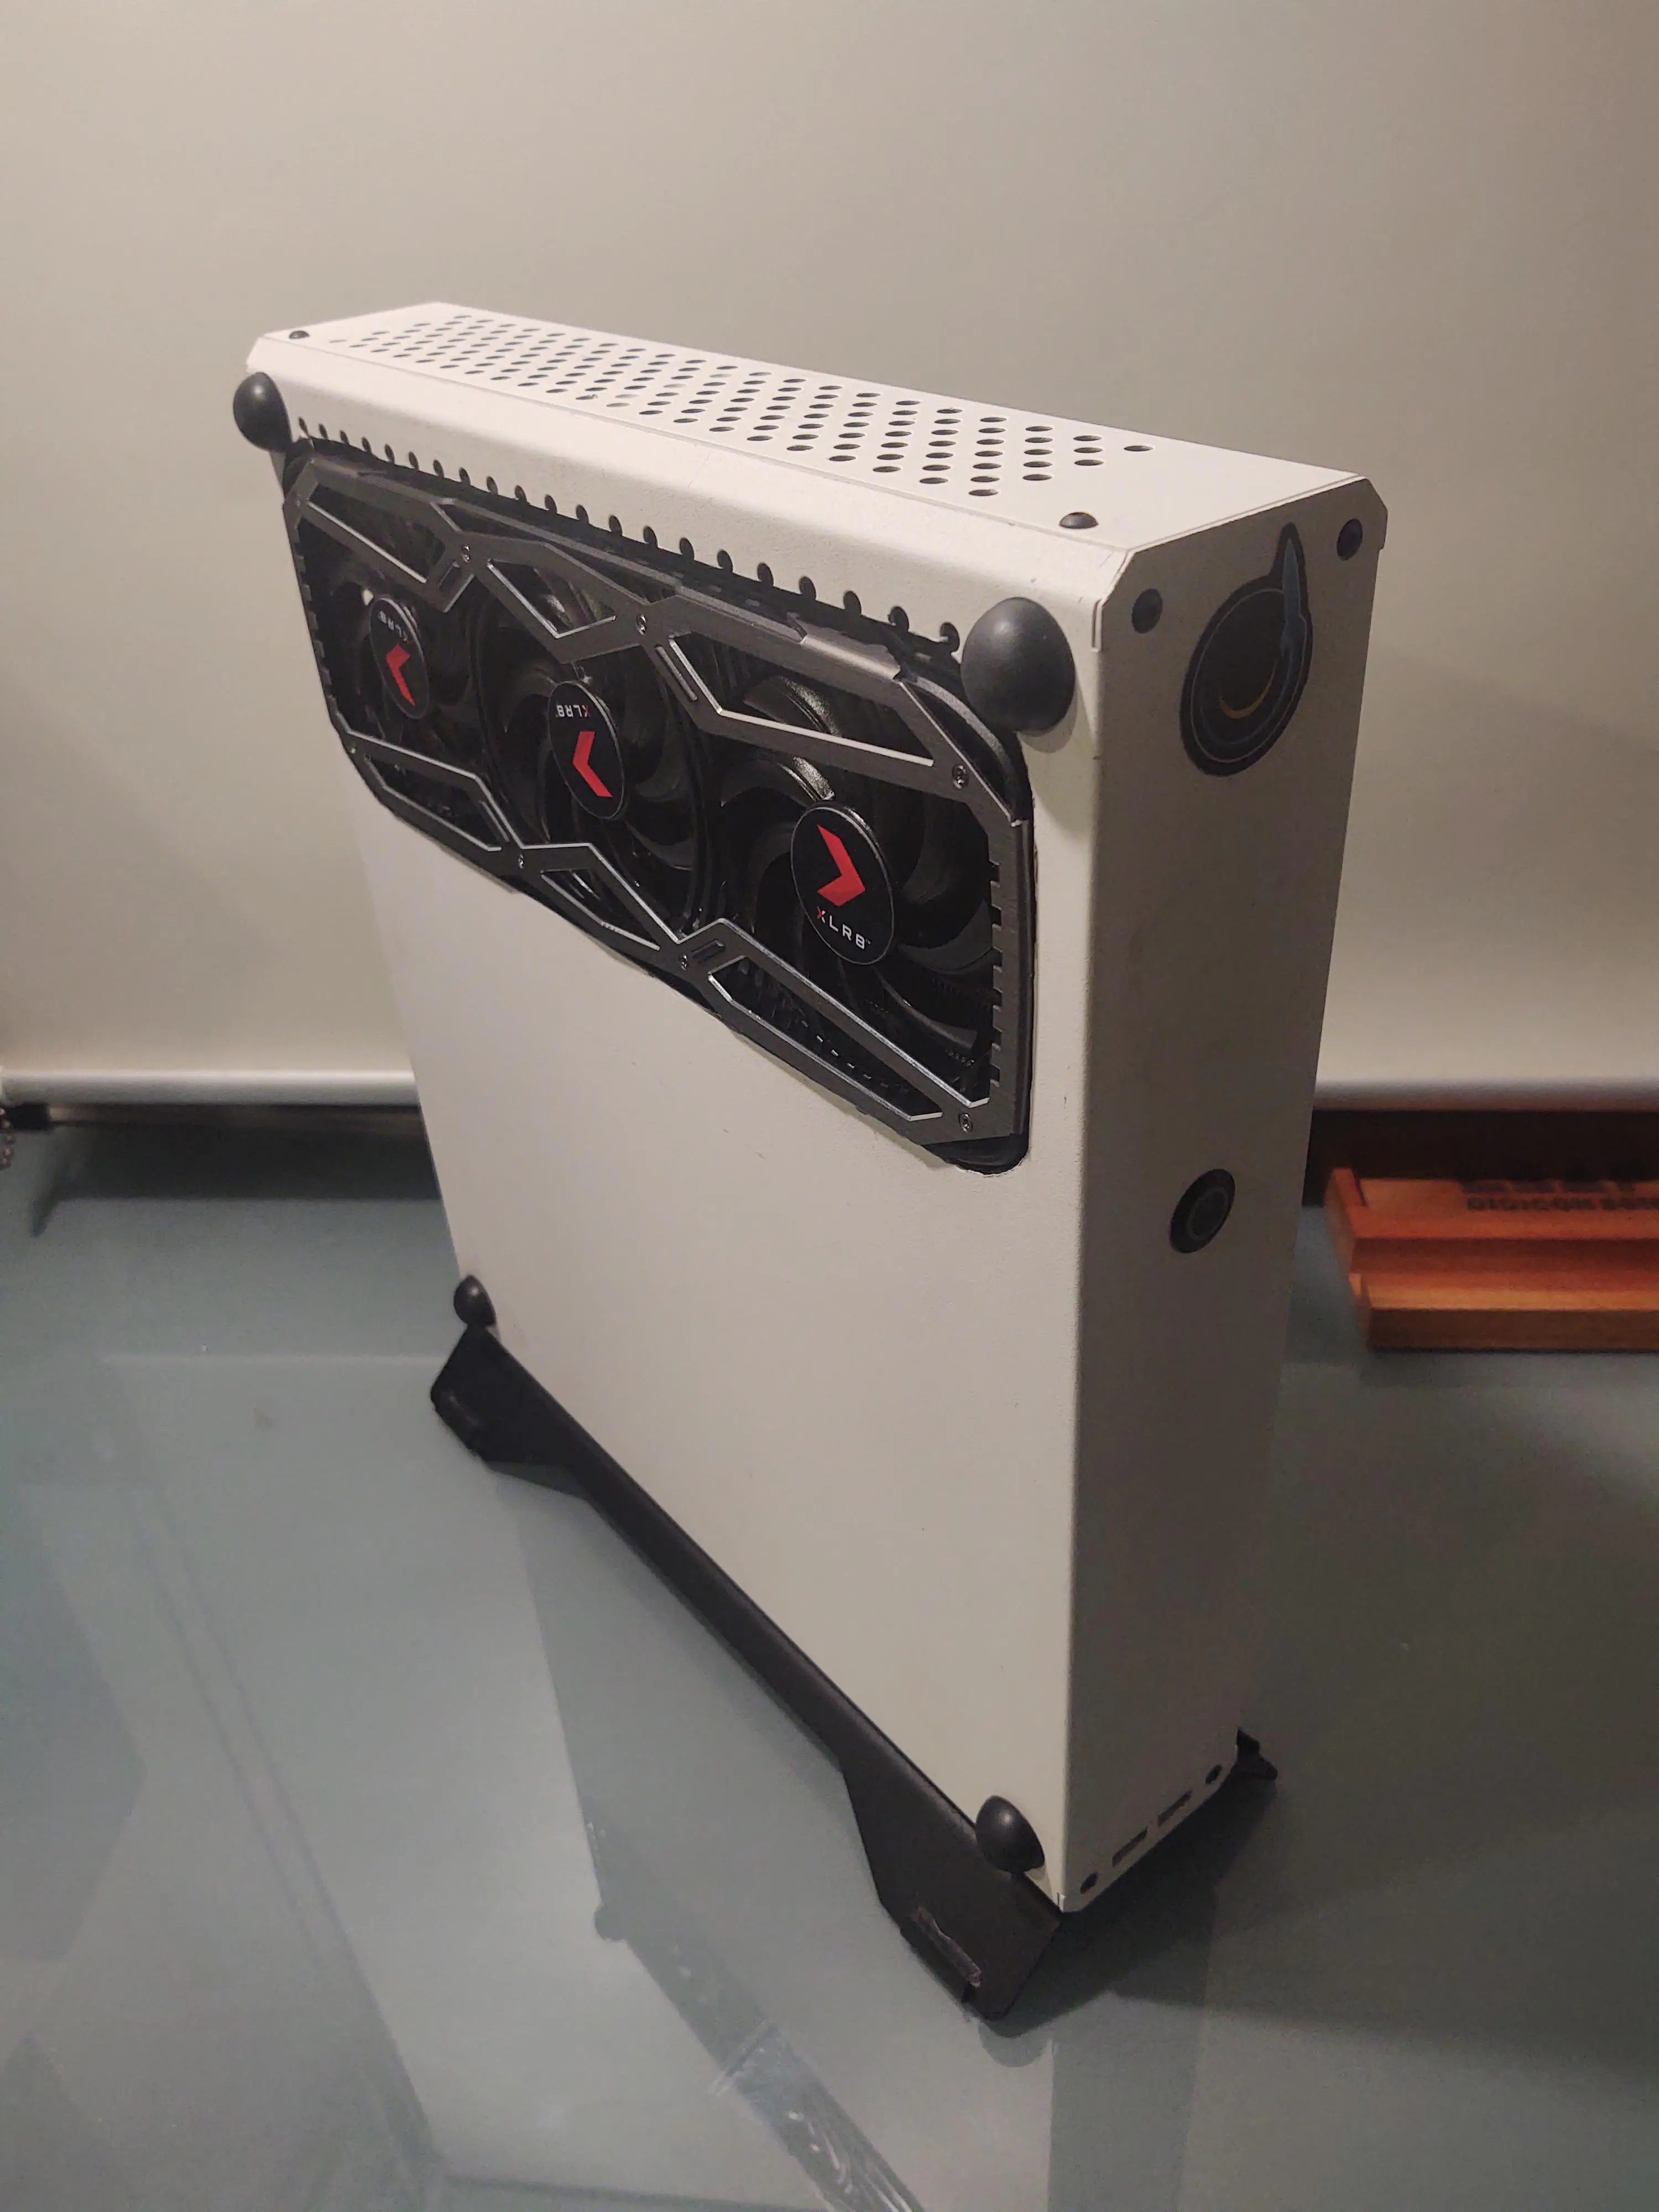 A personal computer in a Dr. Zaber Sentry PC case, modified by cutting a window out of its side so the graphics card peeks out like a hotrod car engine.